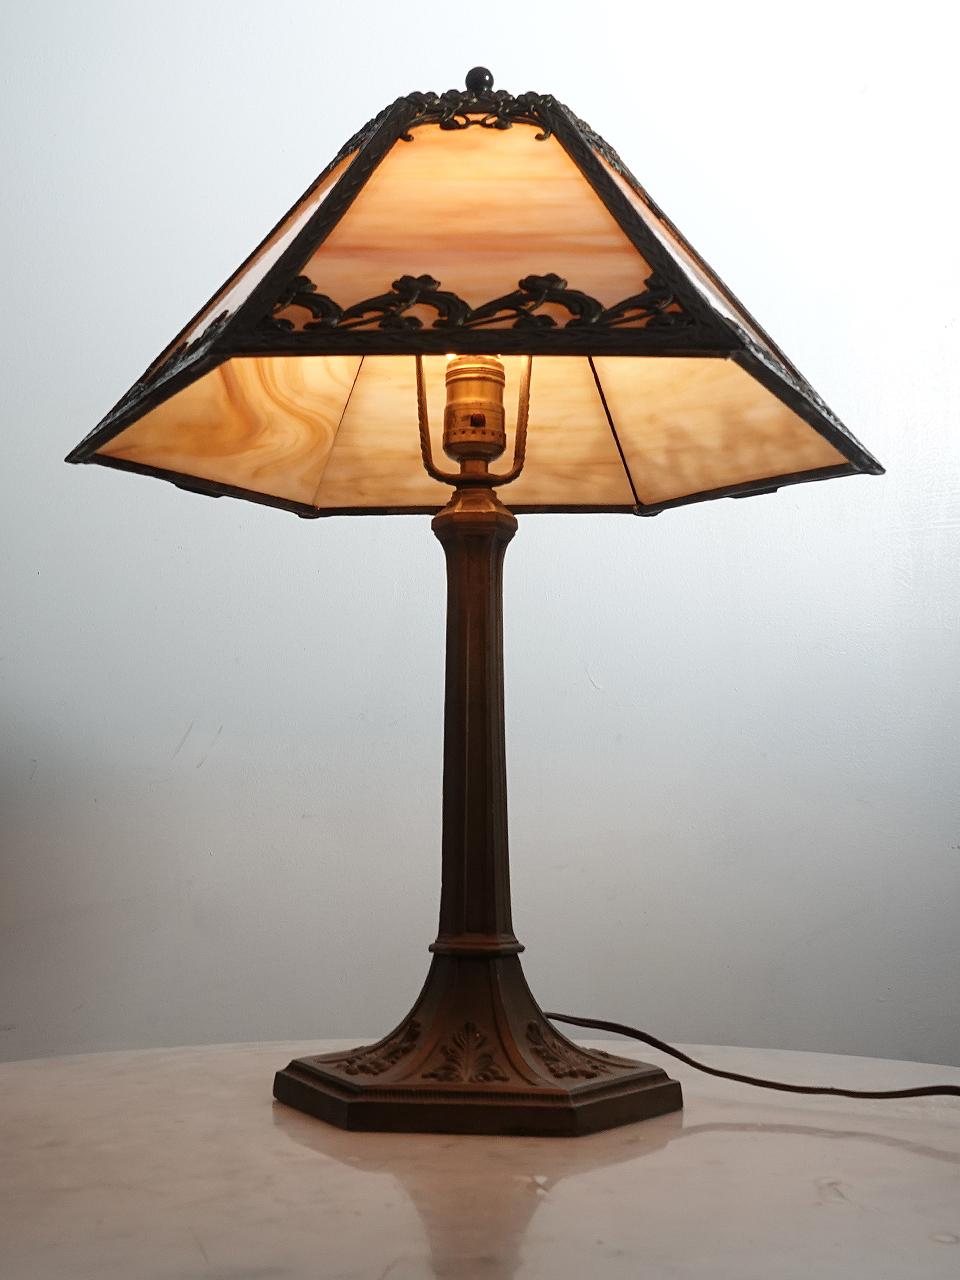 This is a nicely designed Arts and Crafts table lamp. Its simple and clean with a tented shape and 6 cast floral filigree panels. Each panel features a cream -  amber variegated glass and is lit by a single E26 bulb